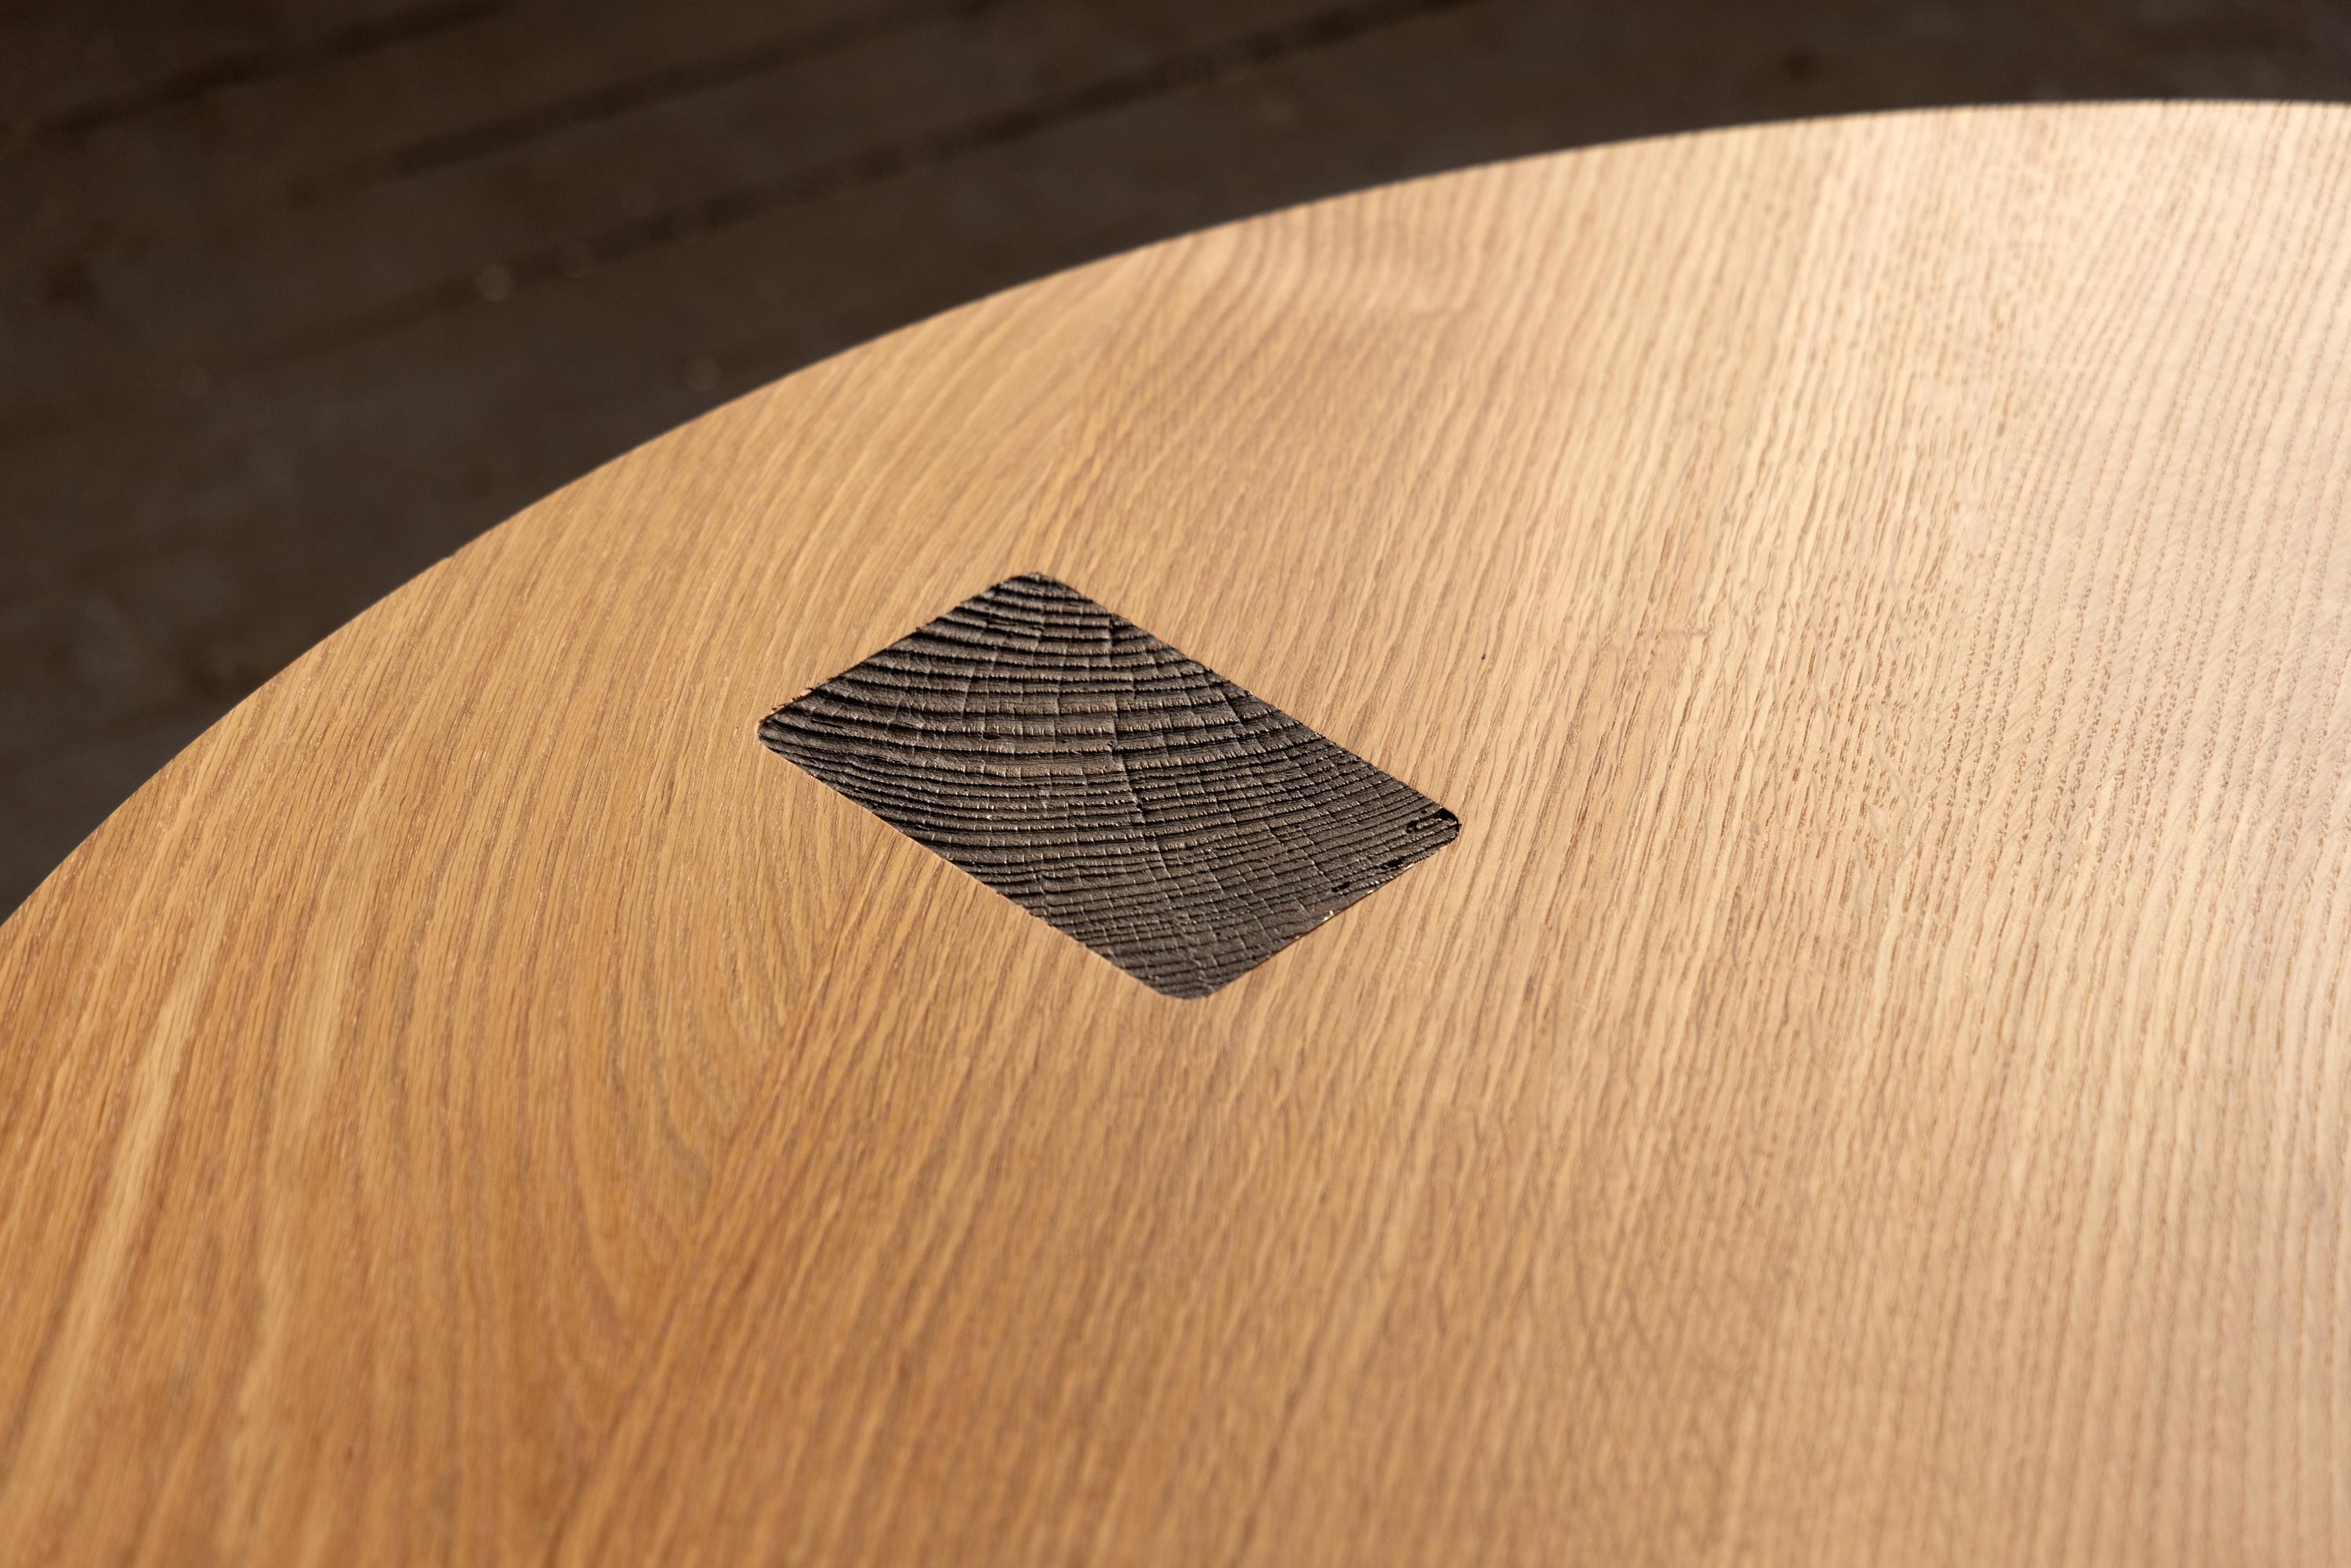 Inspired by Japanese shou sugi ban finishes, that we use on our hyo table and beam bench. We developed our own hardware to enhance the beauty and function to start a new lineage of work. A recent collaboration with resident Birmingham metal artists,